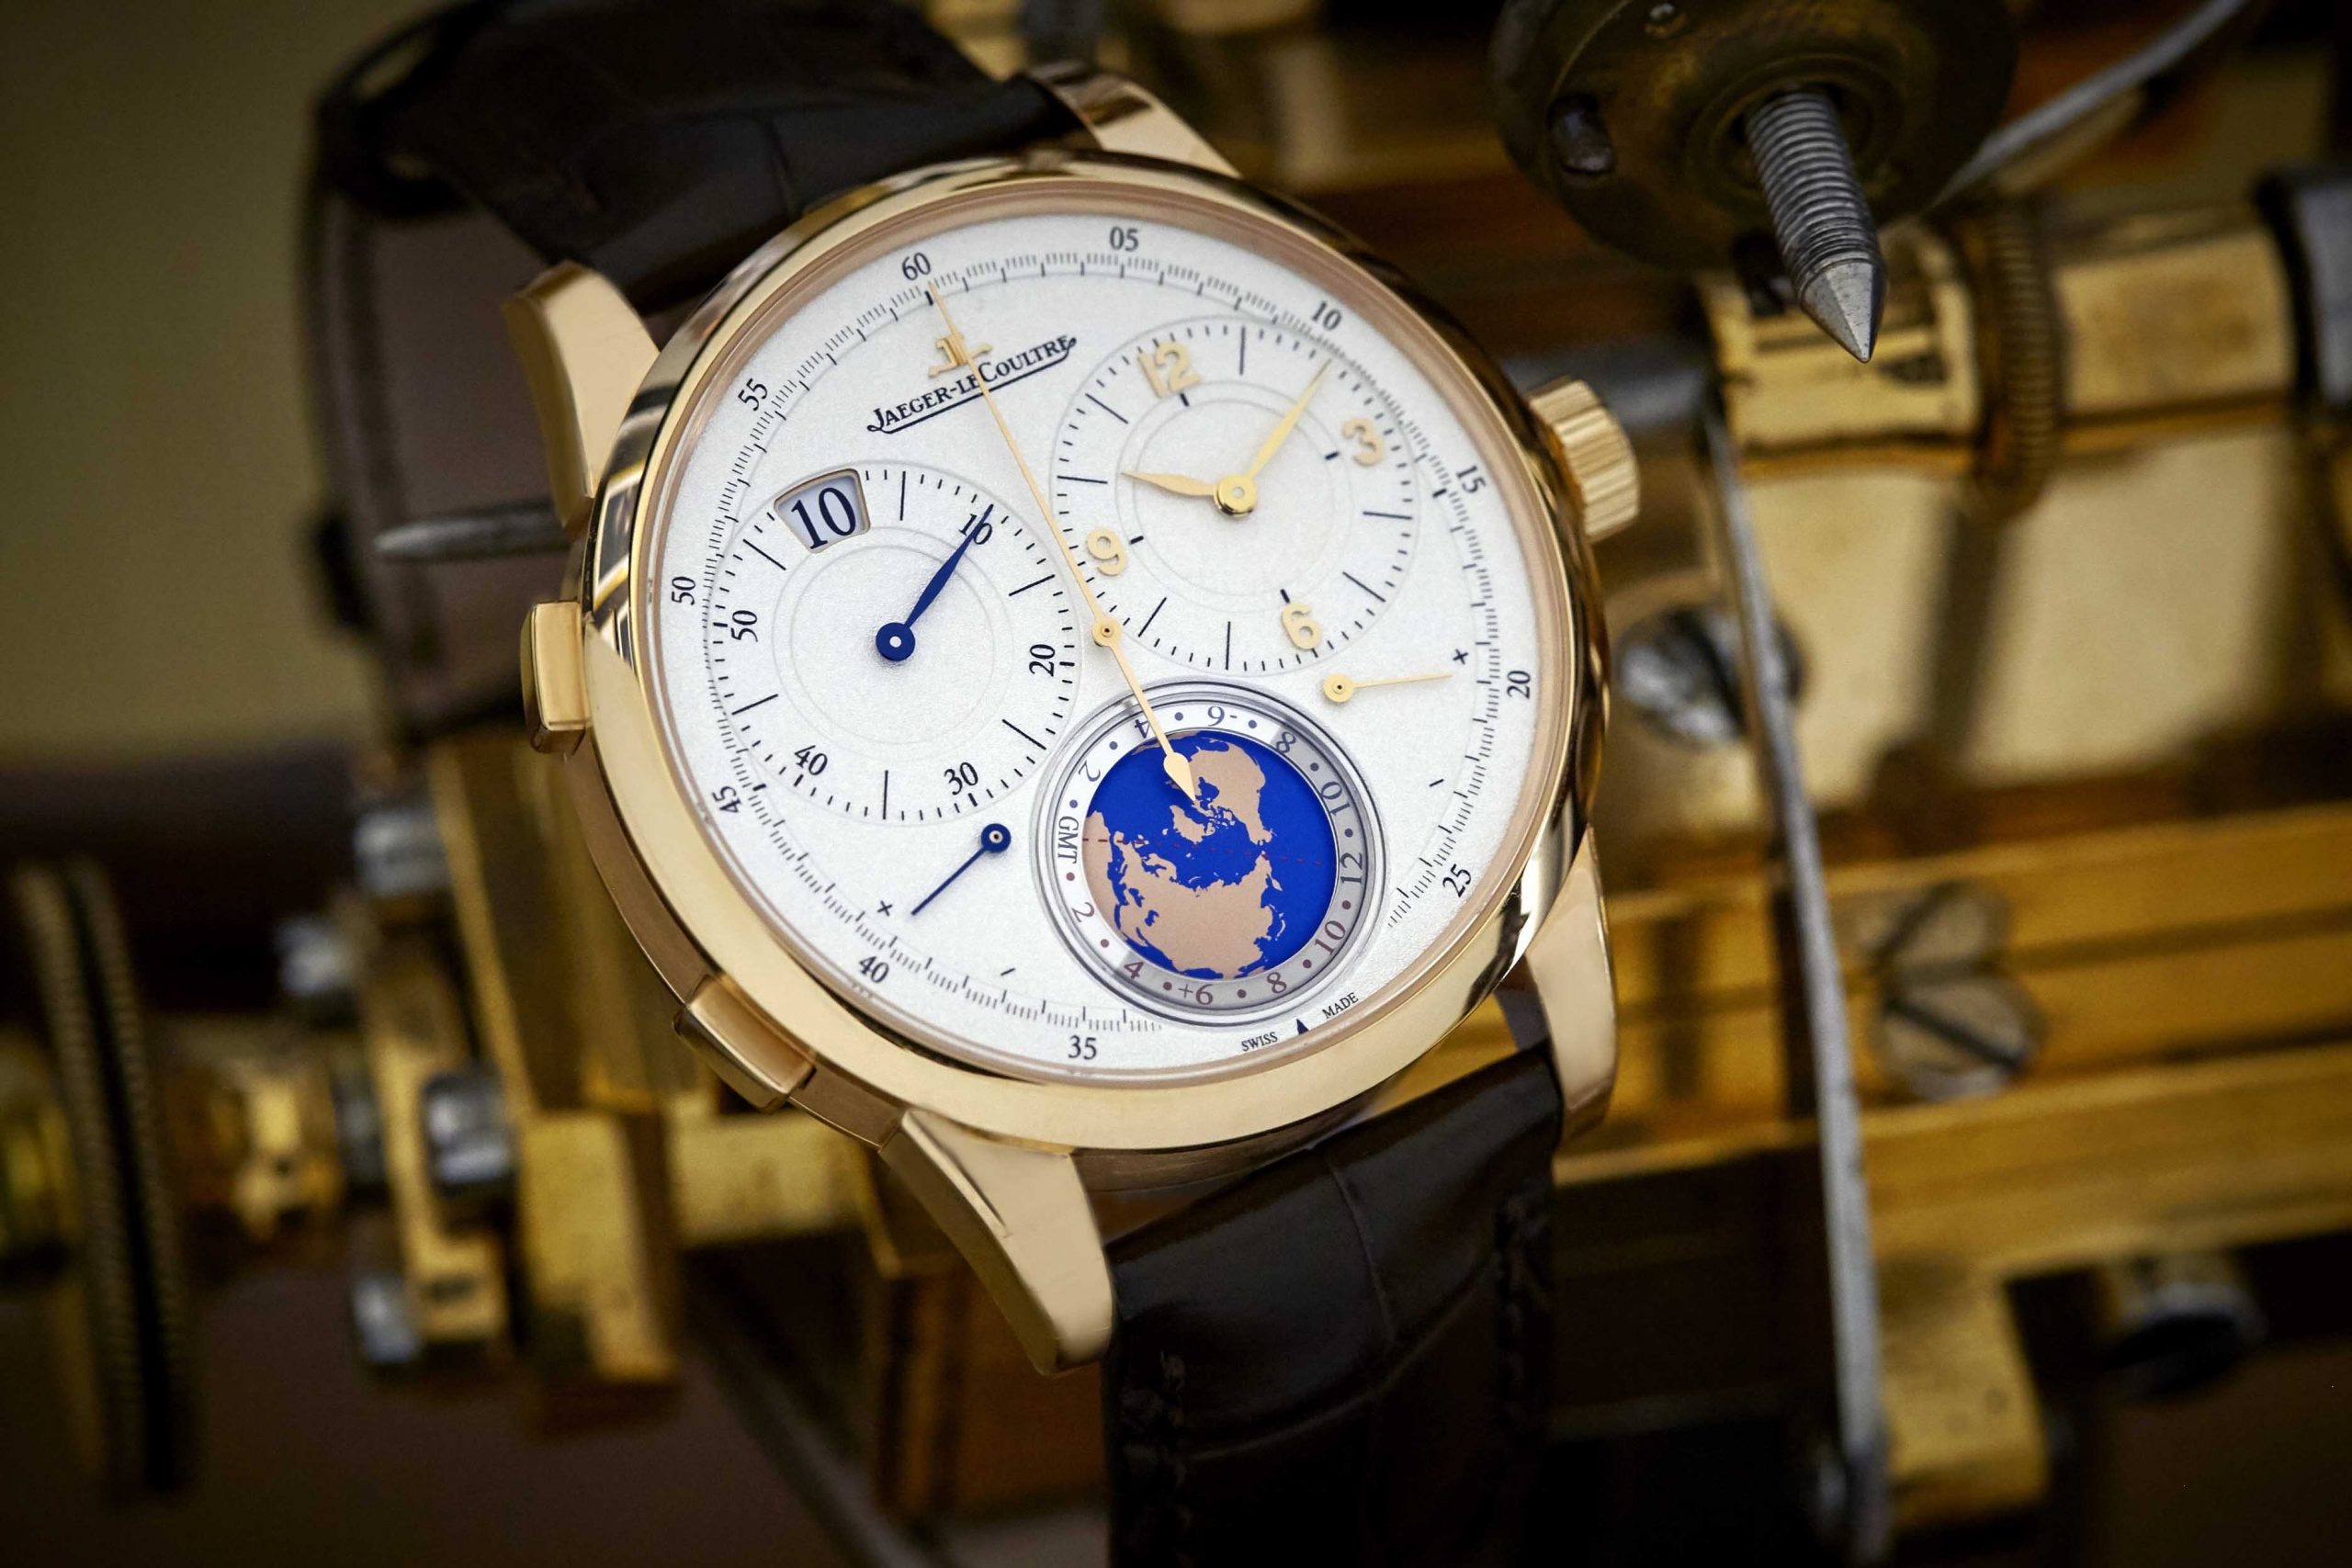 Hands On The Jaeger-LeCoultre Duomètre Unique Travel Time Watch